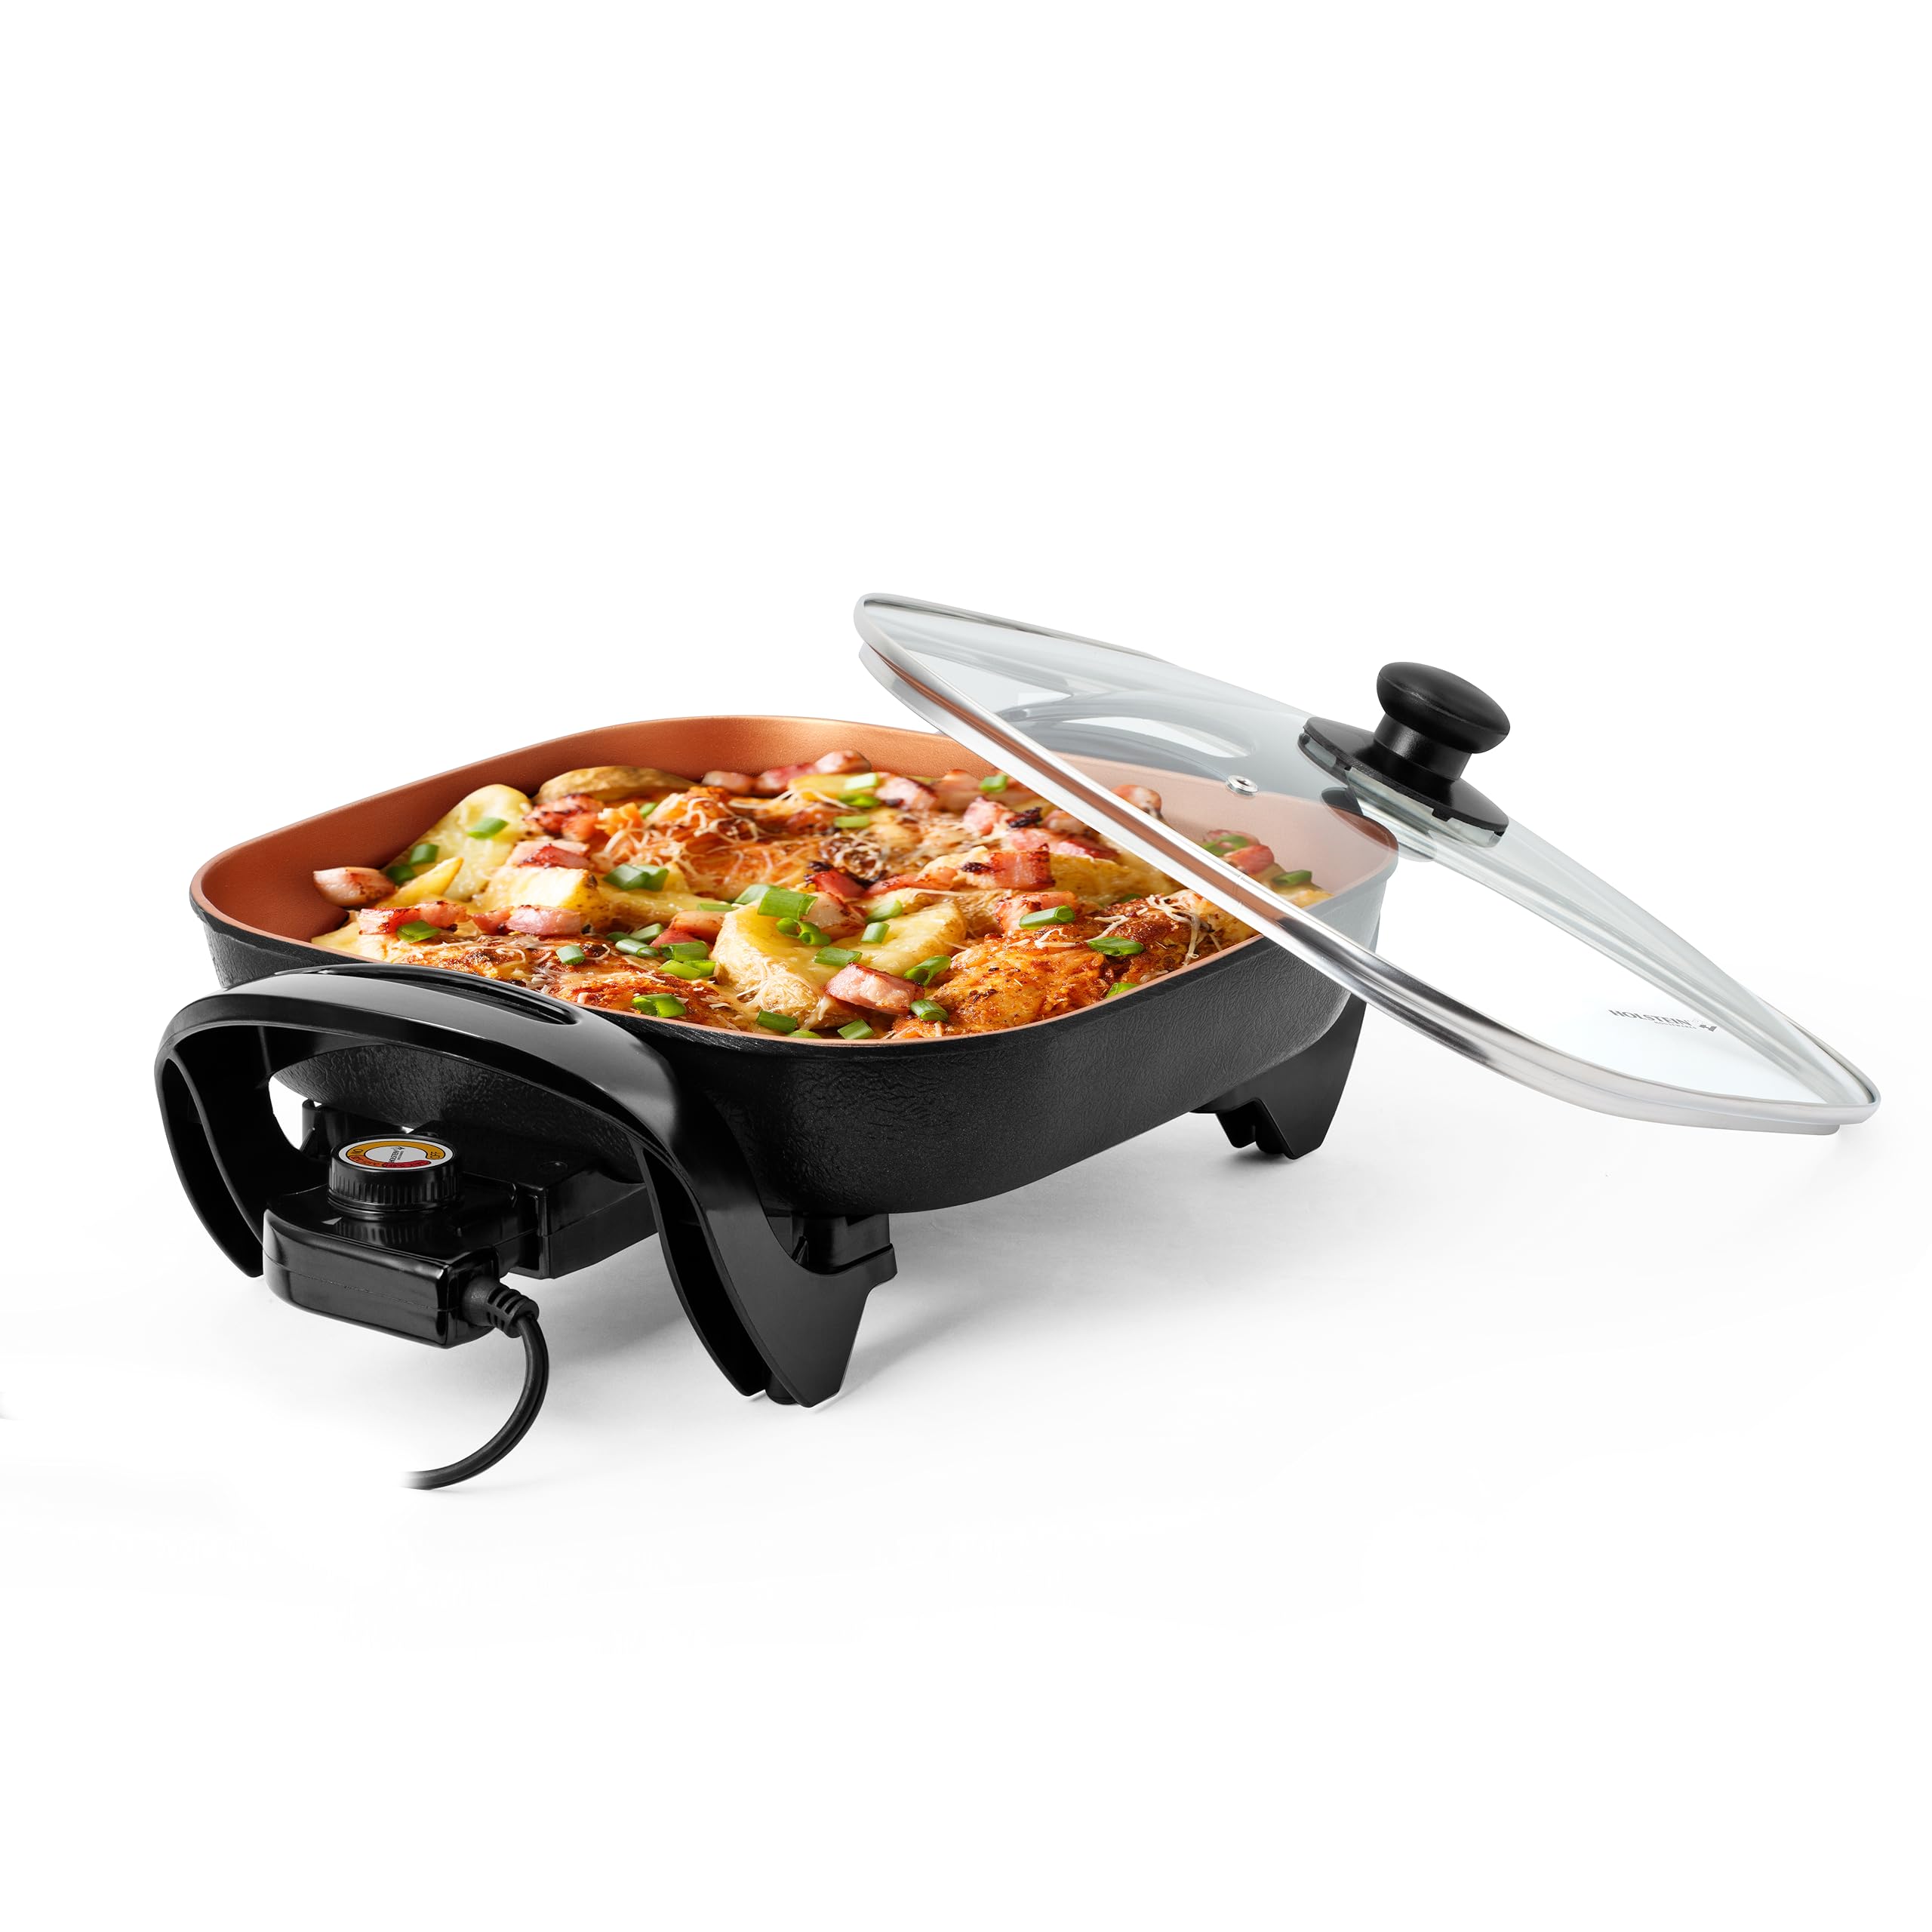 Holstein Housewares 12-Inch Electric Skillet and Frying Pan with Glass Lid, Non-Stick Coating, Temperature Control with Removable Heating Probe, Copper and Black Color